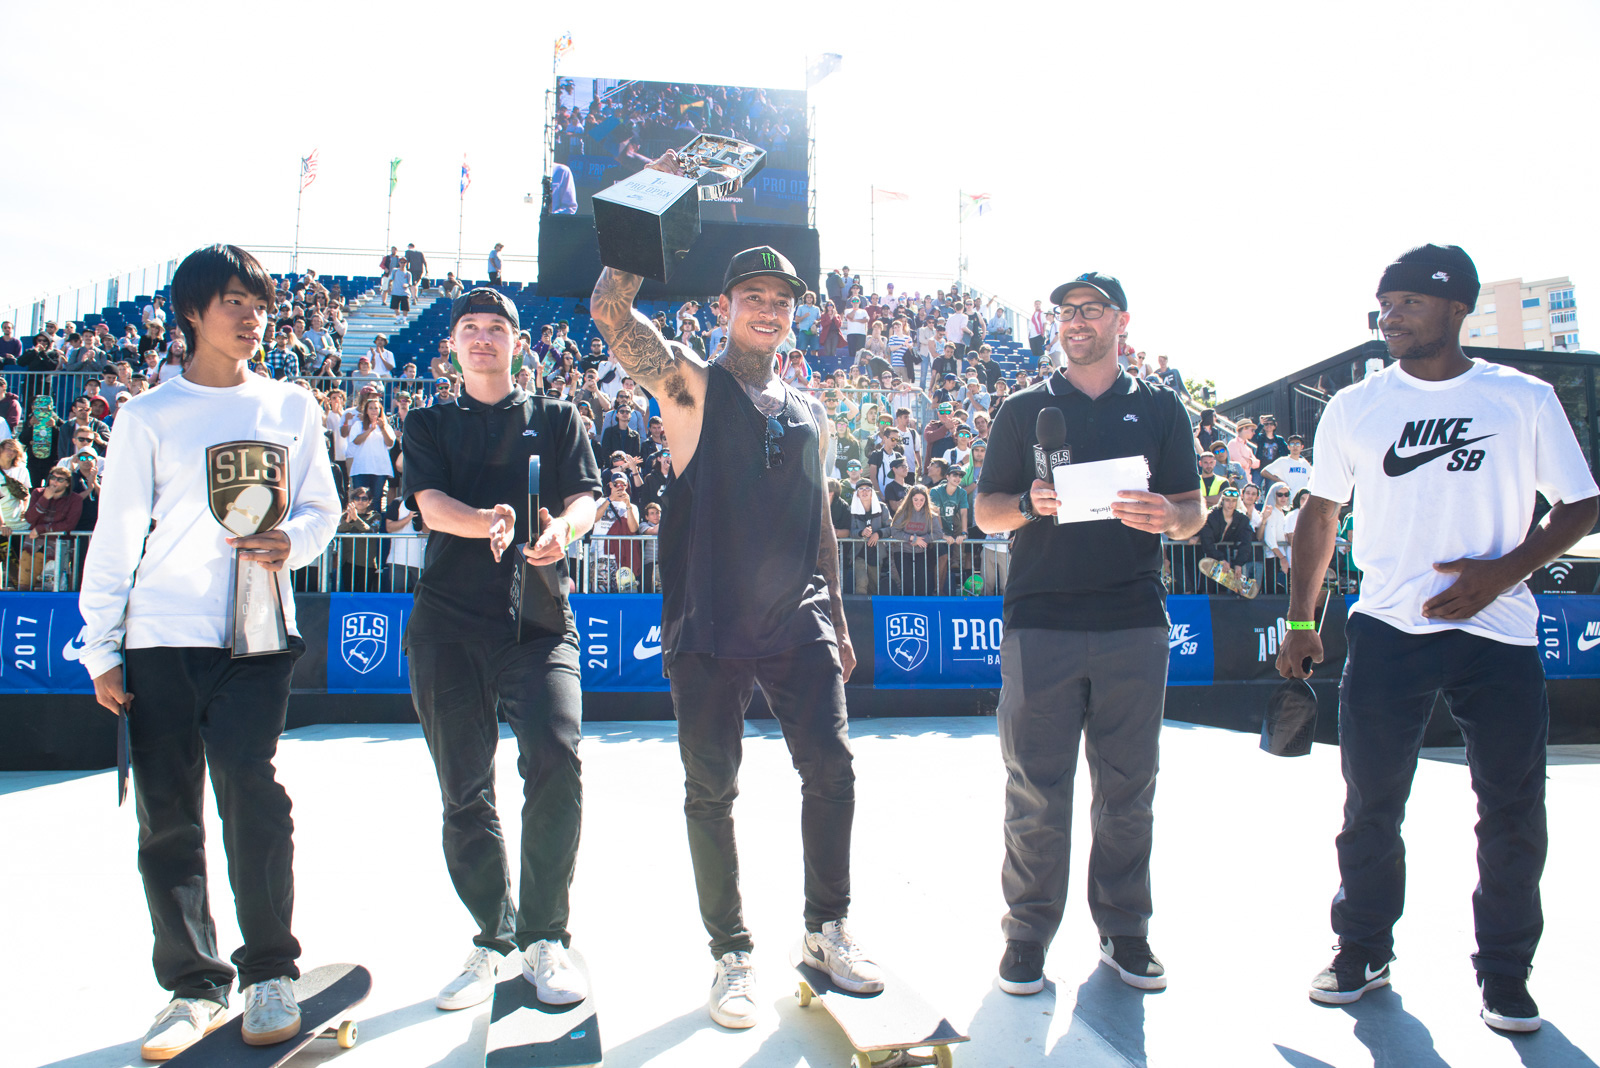 Monster Energy’s Nyjah Huston Takes 1st Place at the SLS Nike SB Pro Open in Barcelona